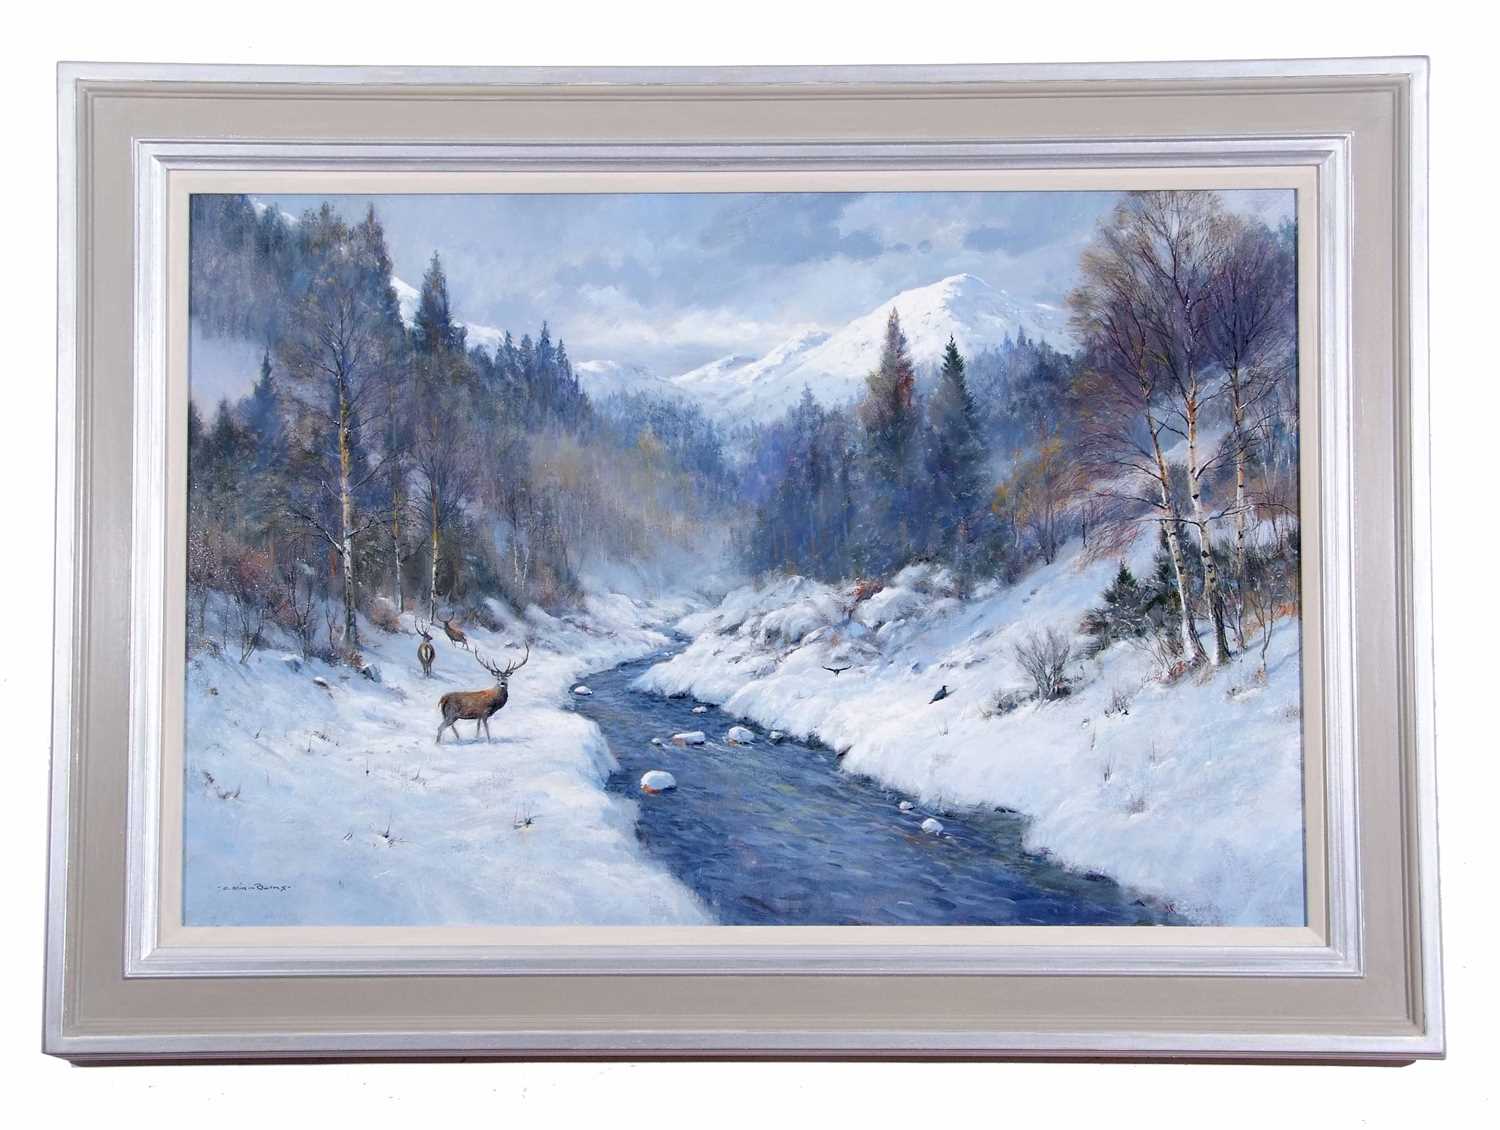 Colin W Burns (British, b.1944), Stags in Glen Affric, oil on canvas, signed. 24x36ins. - Image 2 of 2